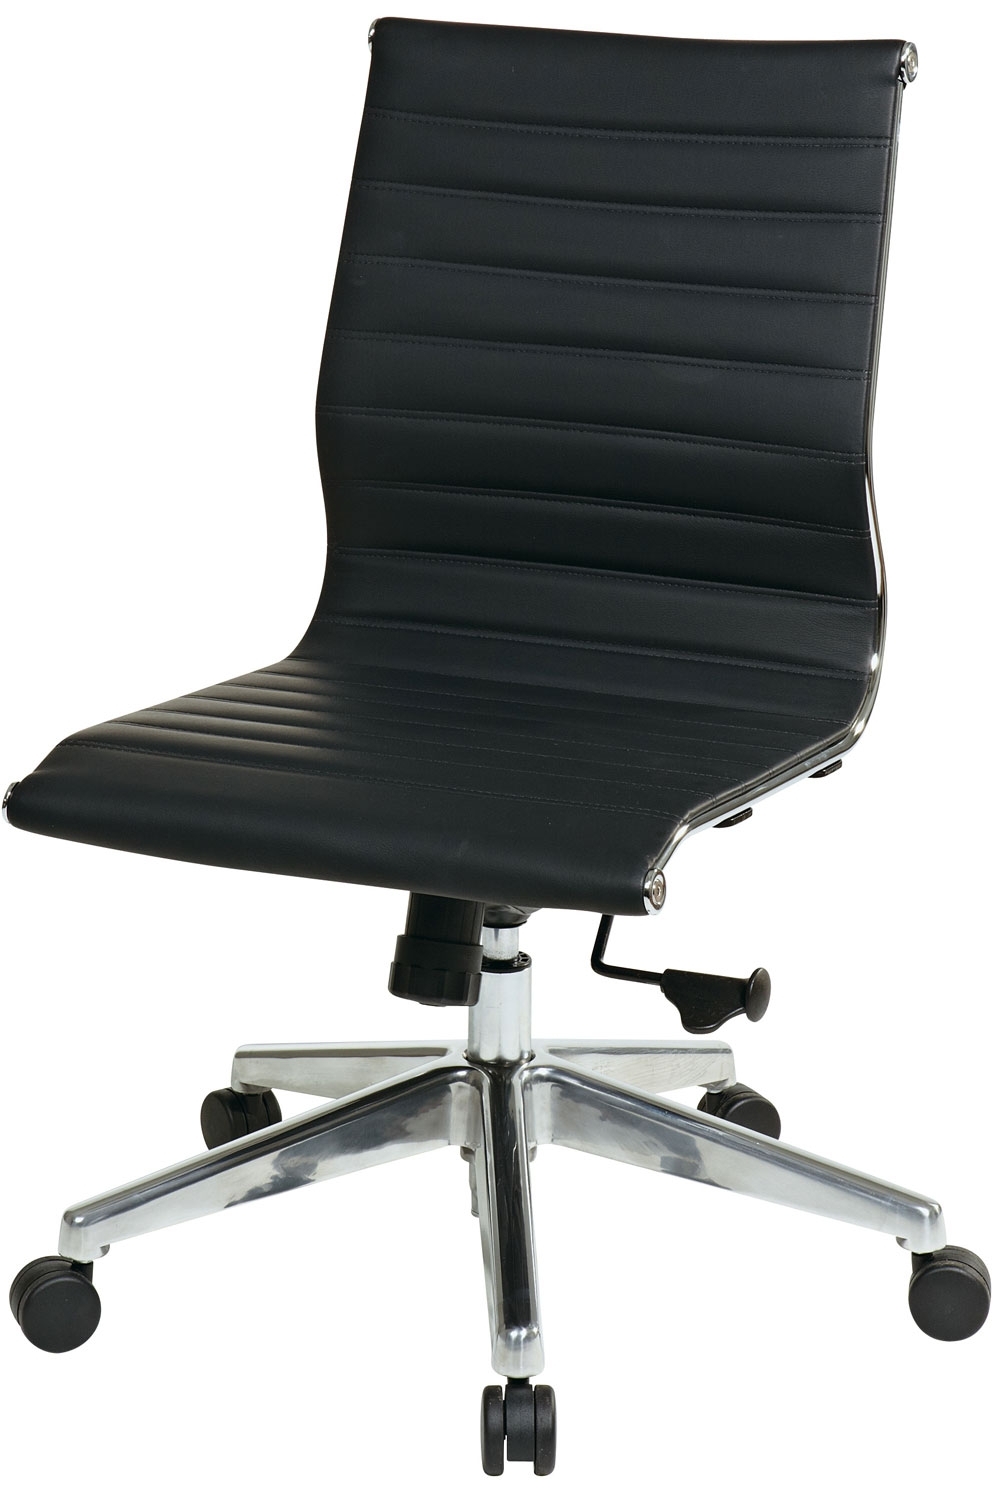 Executive Desk Chair Without Arms